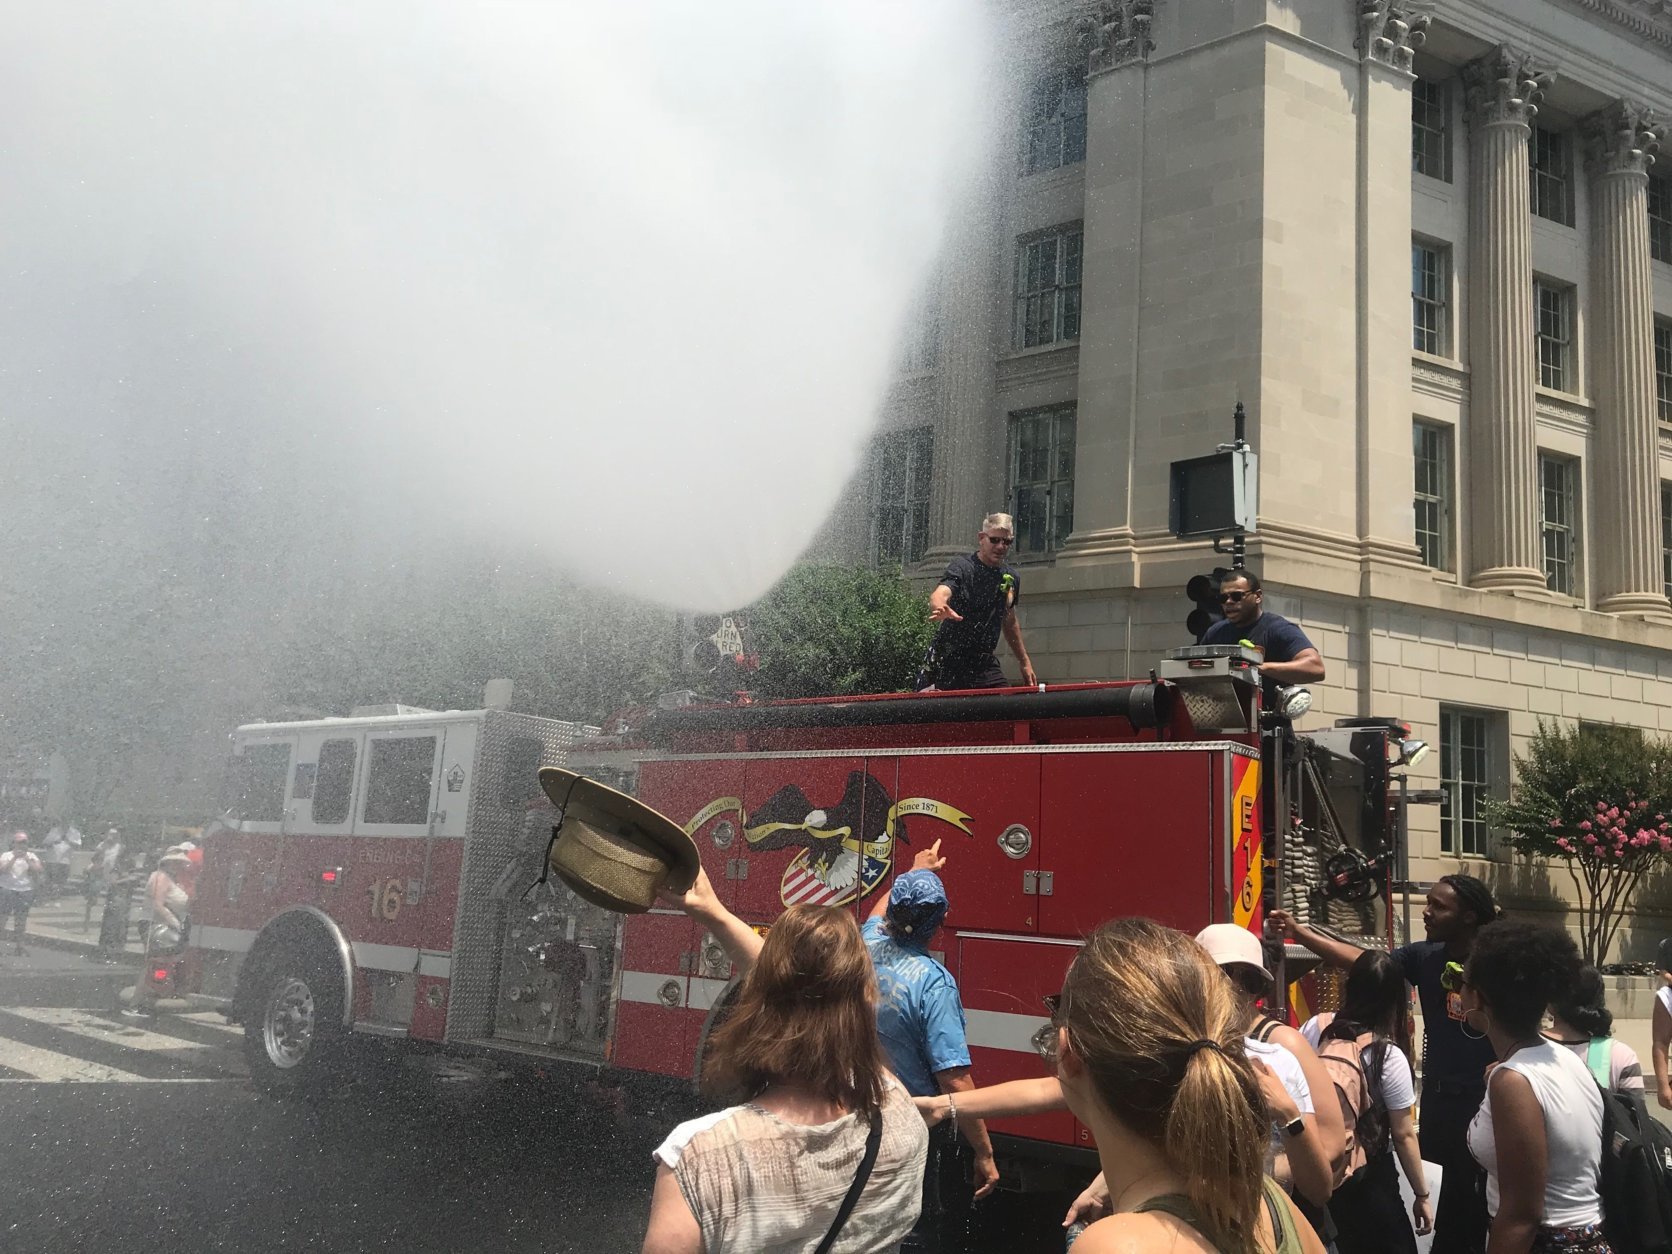 D.C. Fire Engine 16 tapped a fire hydrant at 16th and H Street Northwest, dispensing a spray of water over the intersection to provide demonstrators some relief from the heat. (WTOP/Dick Uliano)